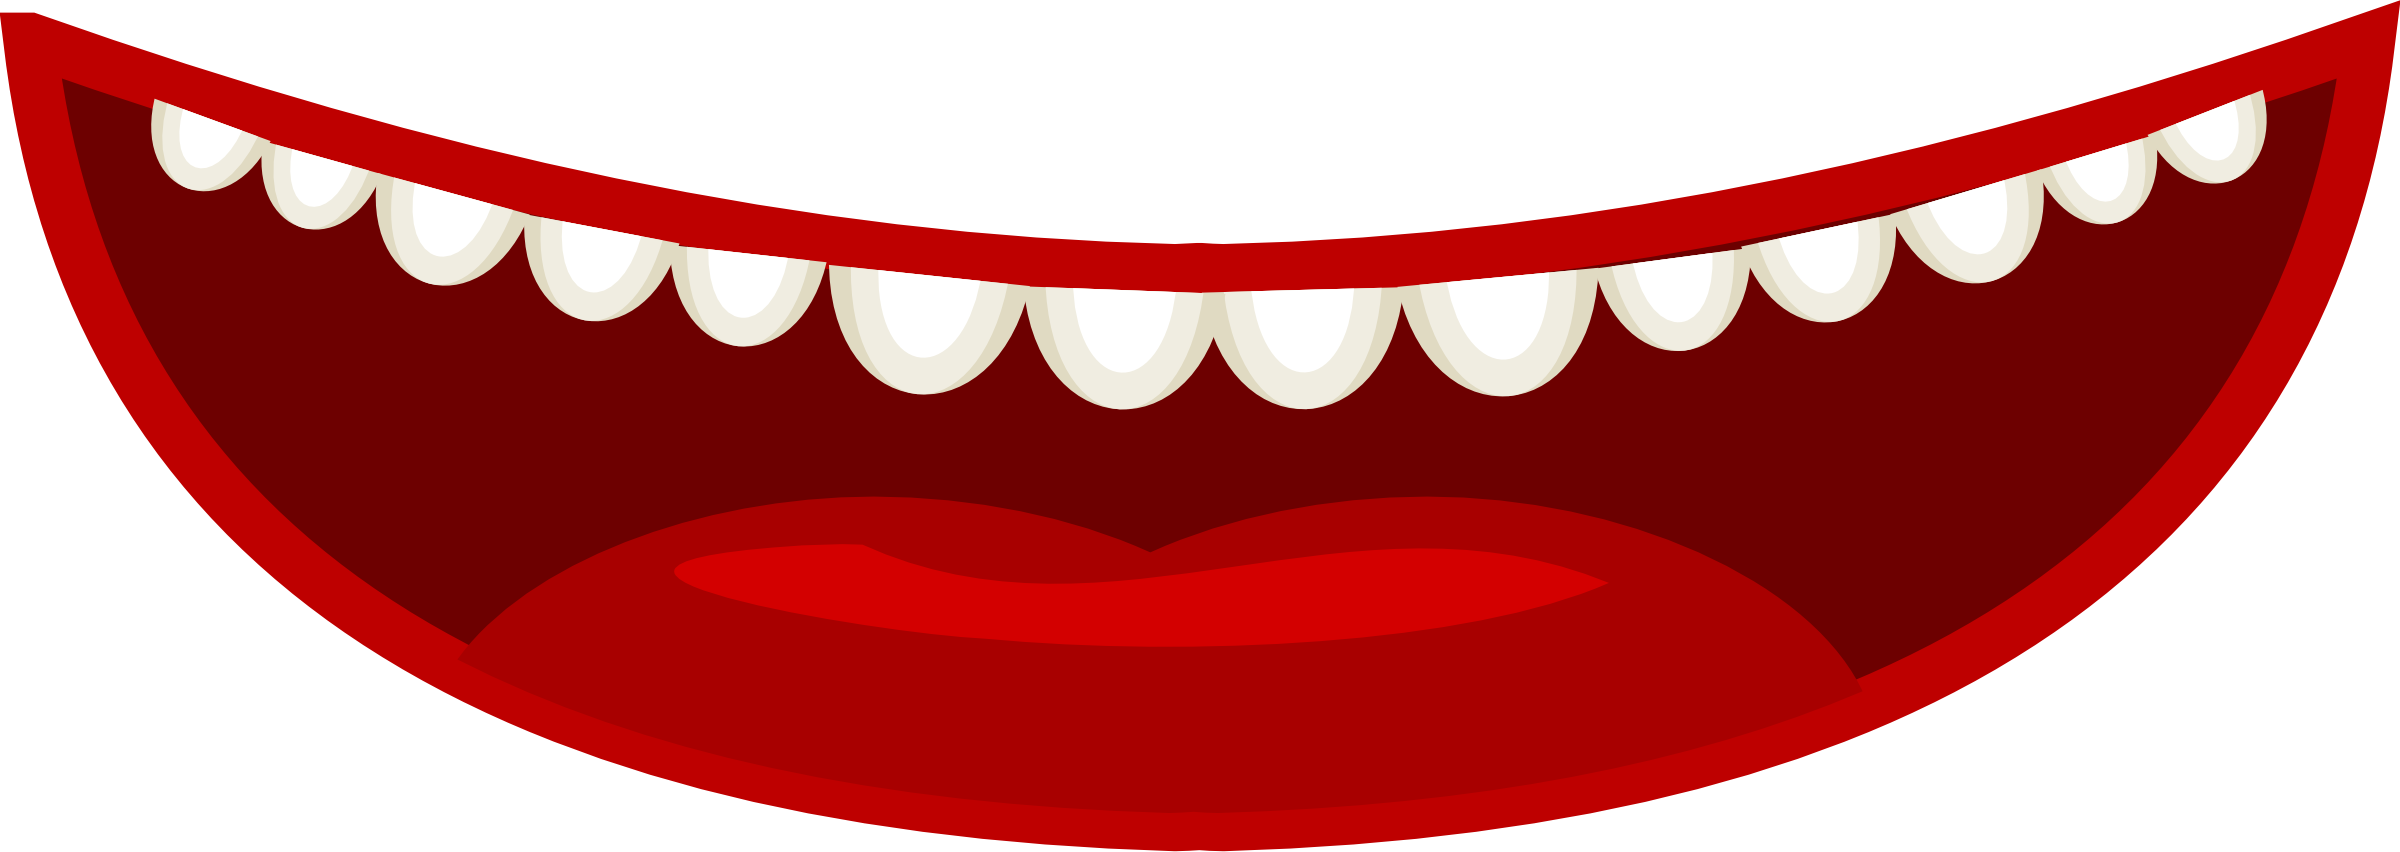 man clipart mouth